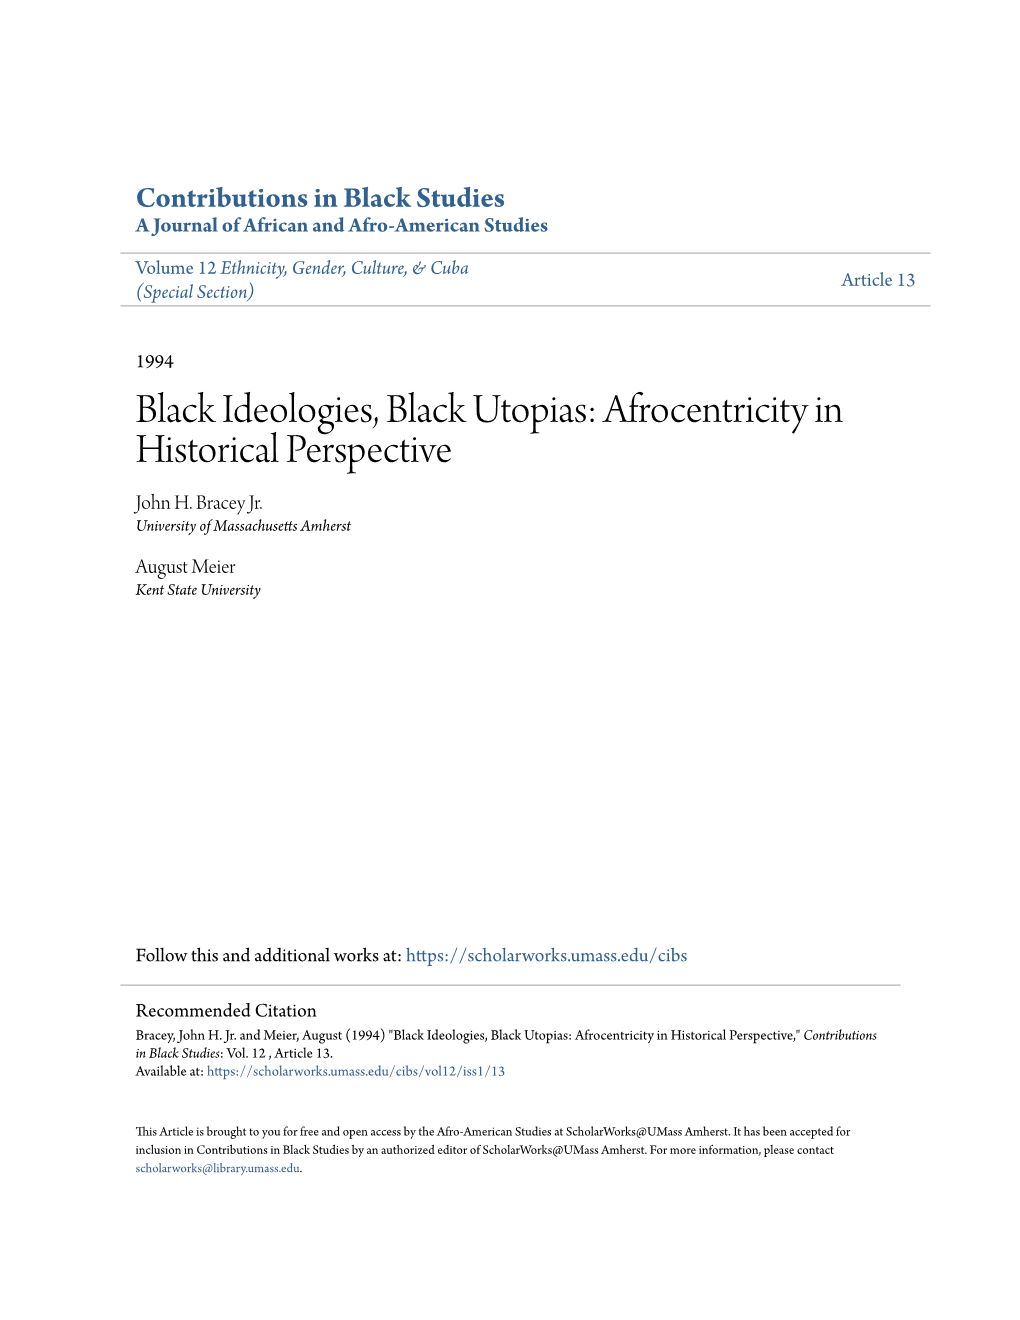 Black Ideologies, Black Utopias: Afrocentricity in Historical Perspective John H